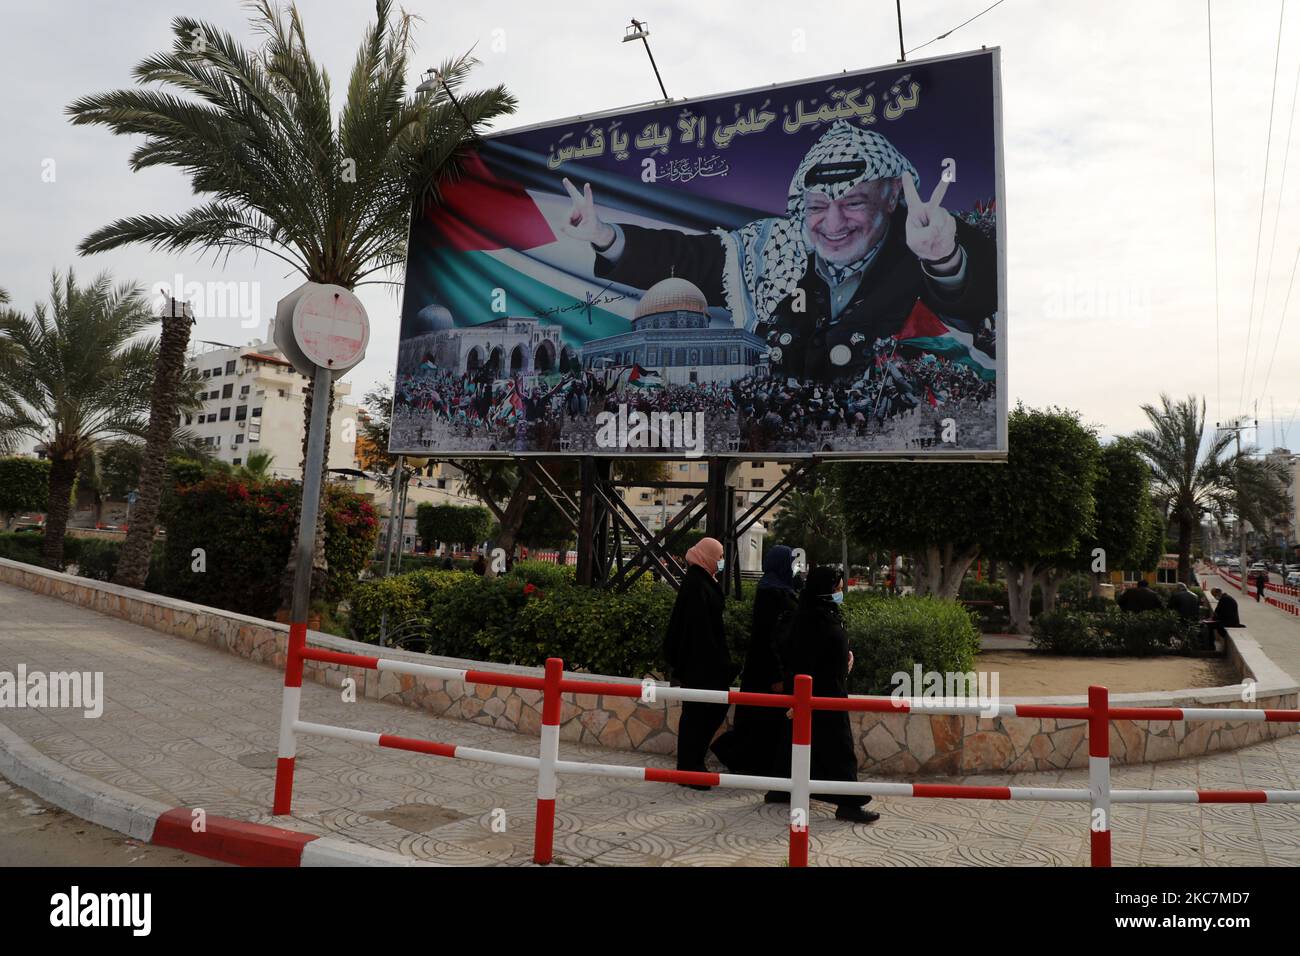 Palestinians women walk past a mural depicting late leader Yasser Arafat in Gaza City, on January 17, 2021 - Palestinian president Mahmud Abbas announced dates for the first Palestinian elections in more than 15 years, setting legislative polls for May 22 and a July 31 presidential vote. Abbas's Fatah party, which controls the Palestinian Authority based in the occupied West Bank, and the Hamas Islamists, who hold power in Gaza, have for years expressed interest in taking Palestinians back to the polls. (Photo by Majdi Fathi/NurPhoto) Stock Photo